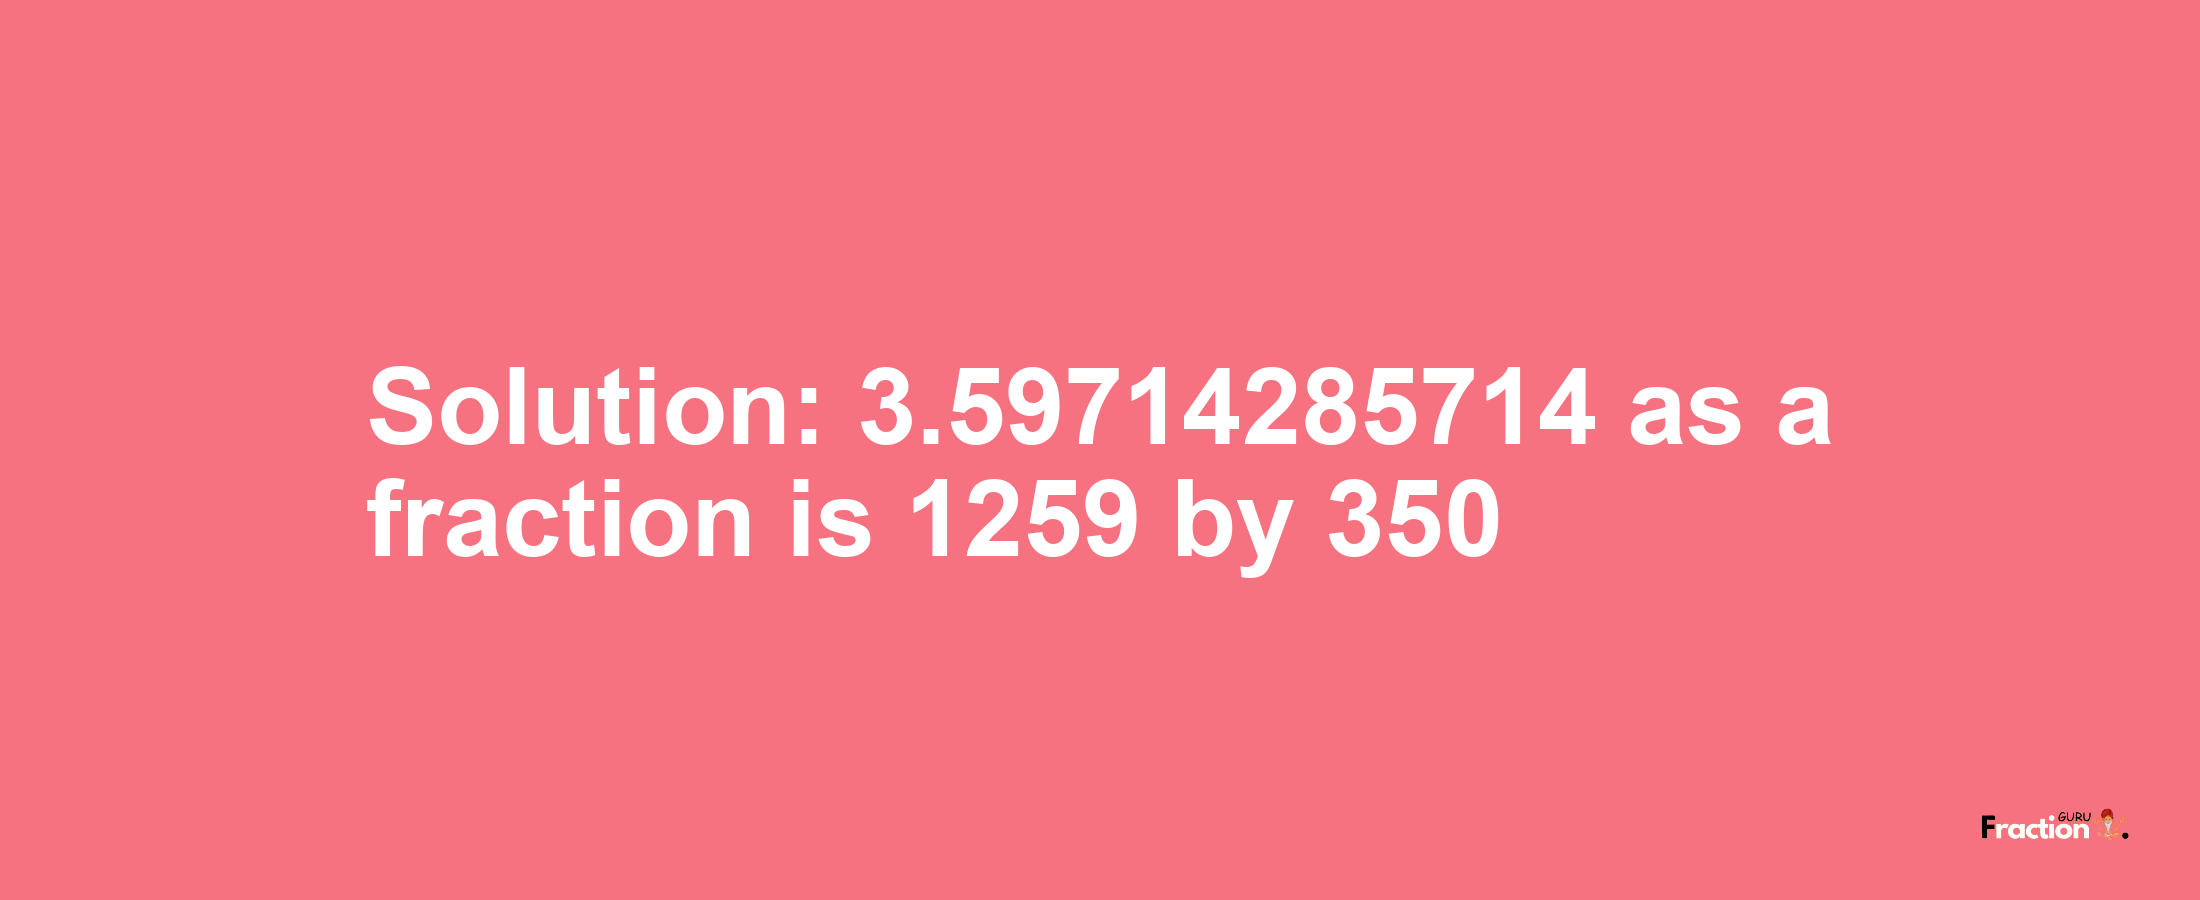 Solution:3.59714285714 as a fraction is 1259/350